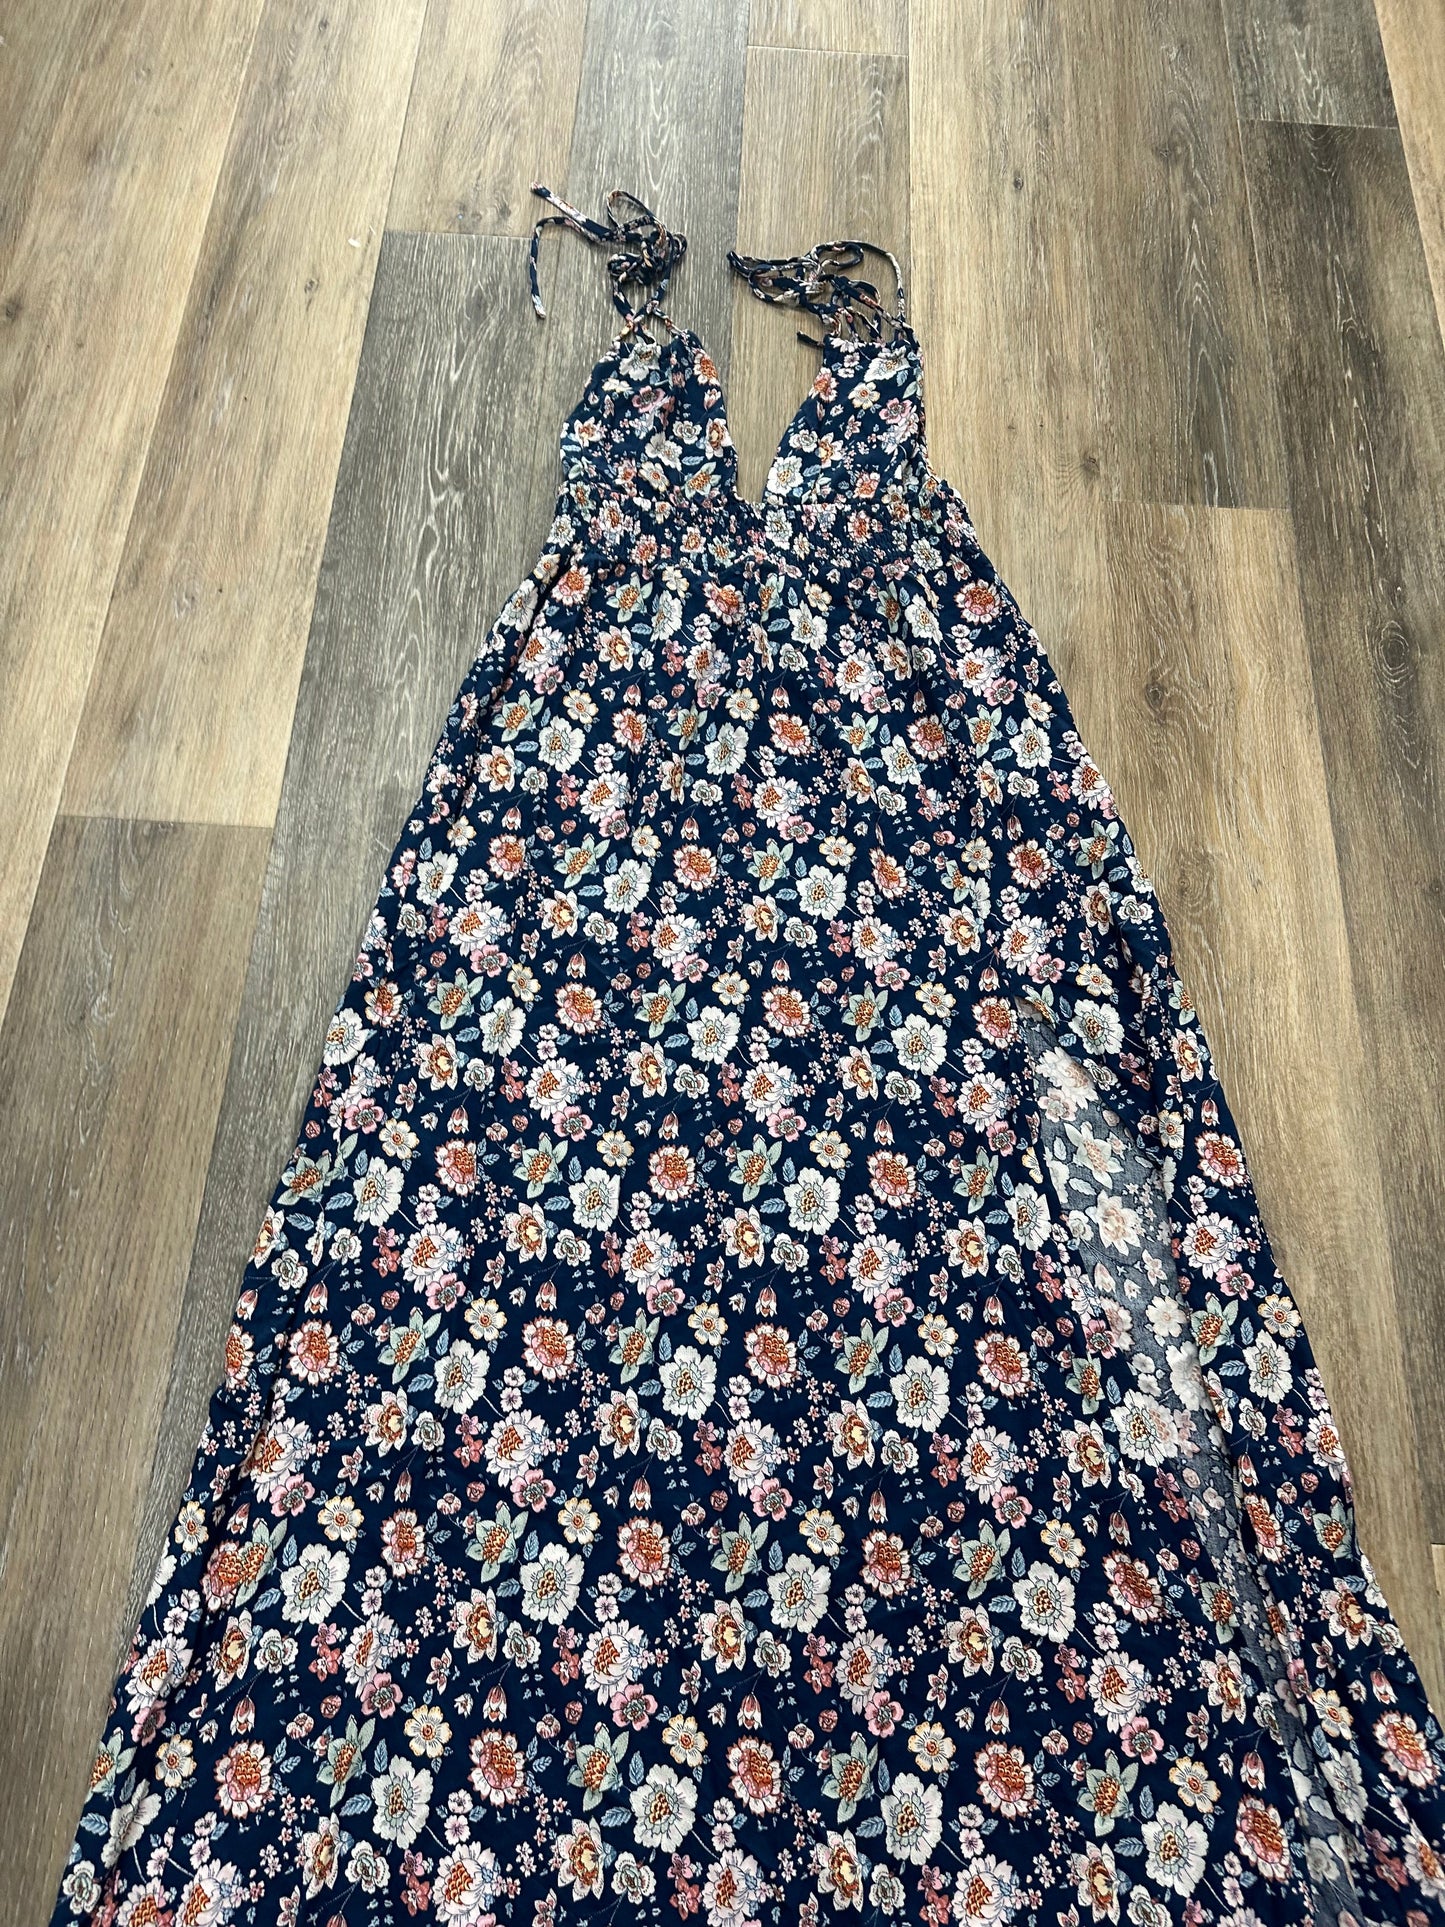 Floral Print Dress Casual Maxi Lulus, Size S